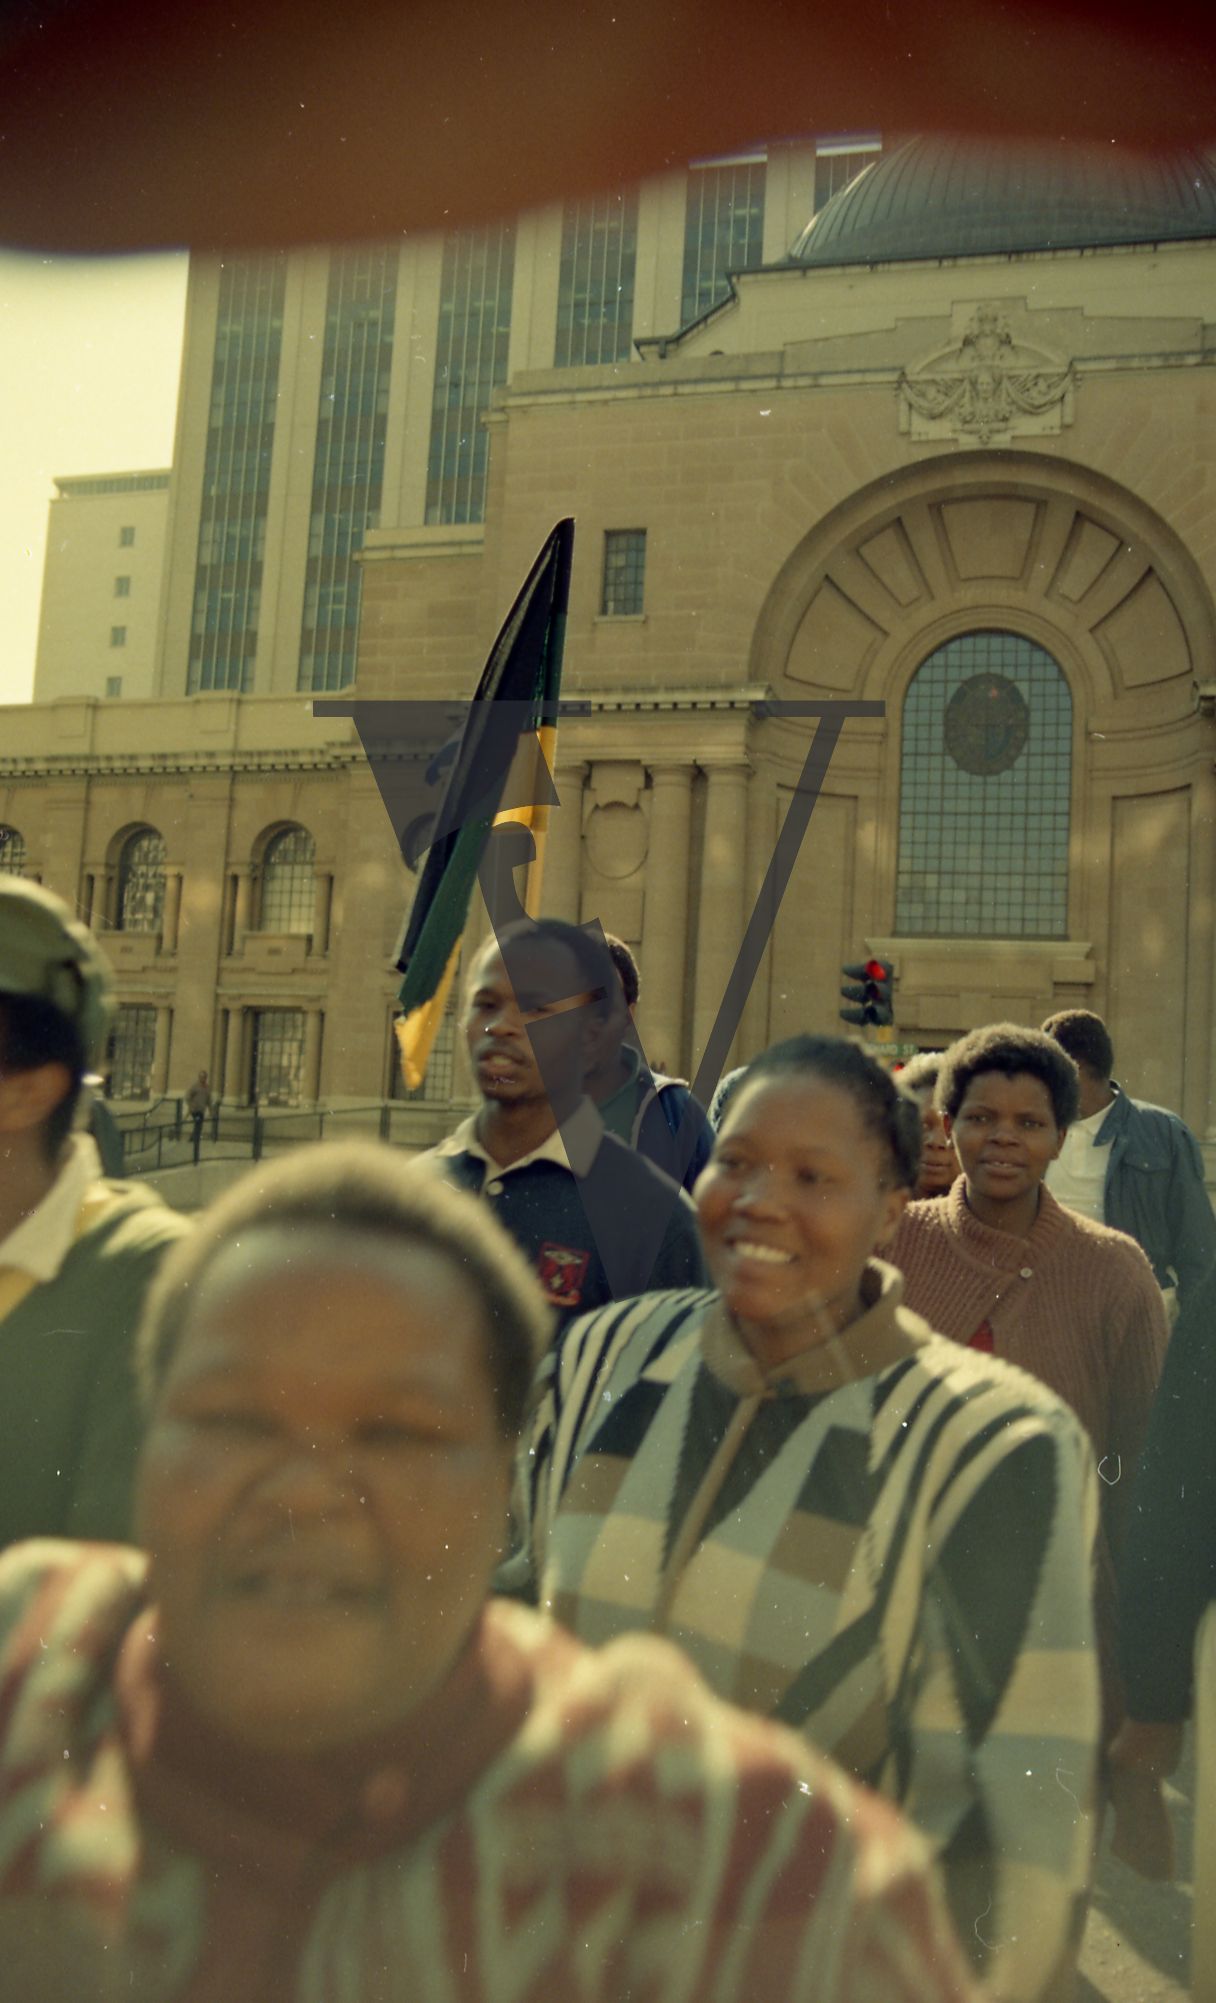 South Africa, Johannesburg, marching group, ANC supporters, flag.